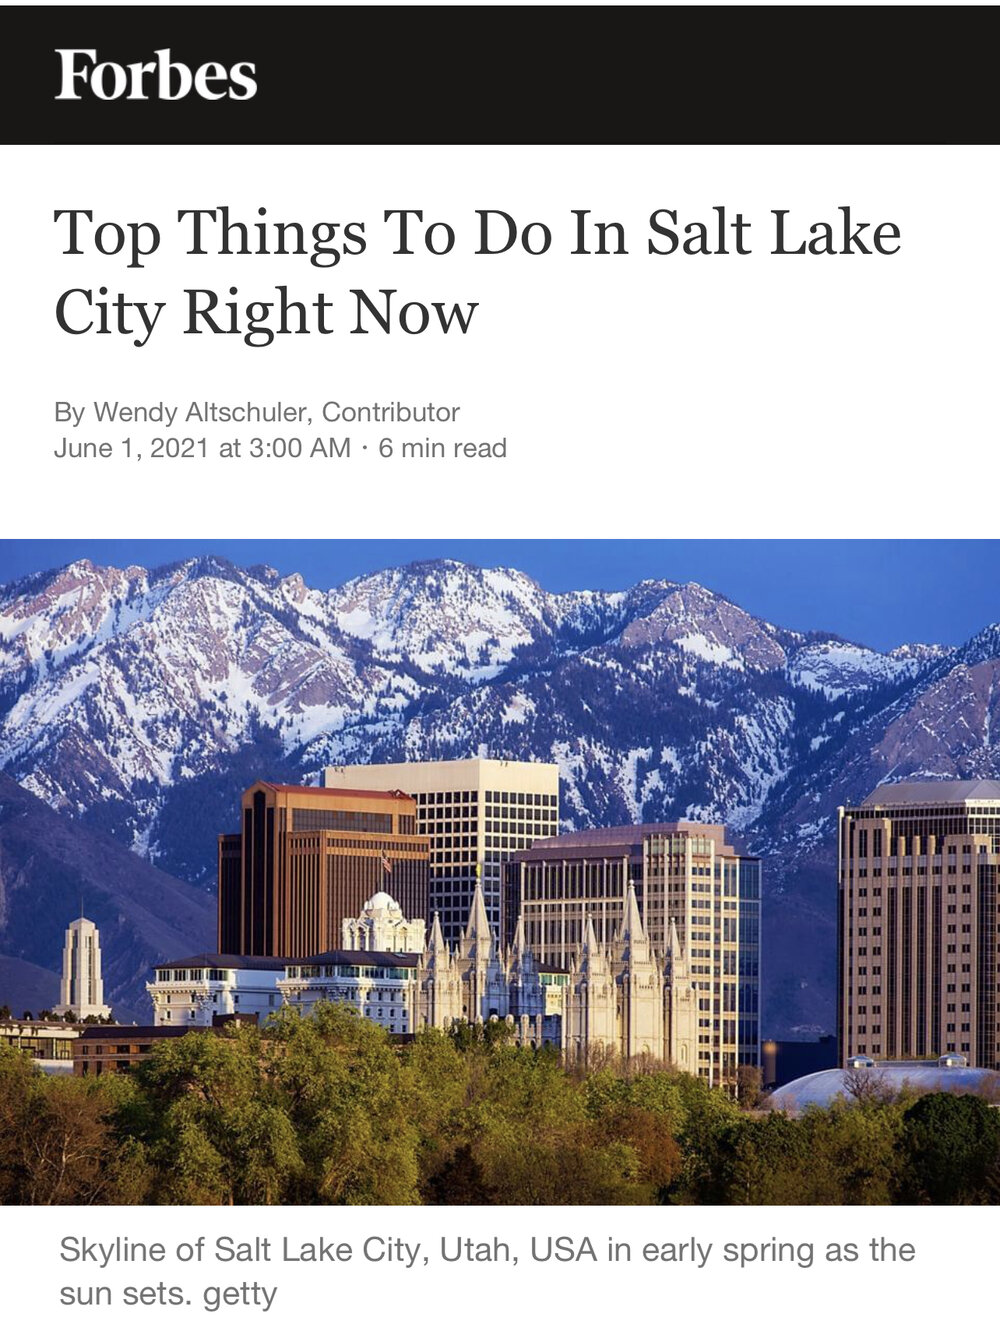 Top Things to Do in Salt Lake City Right Now